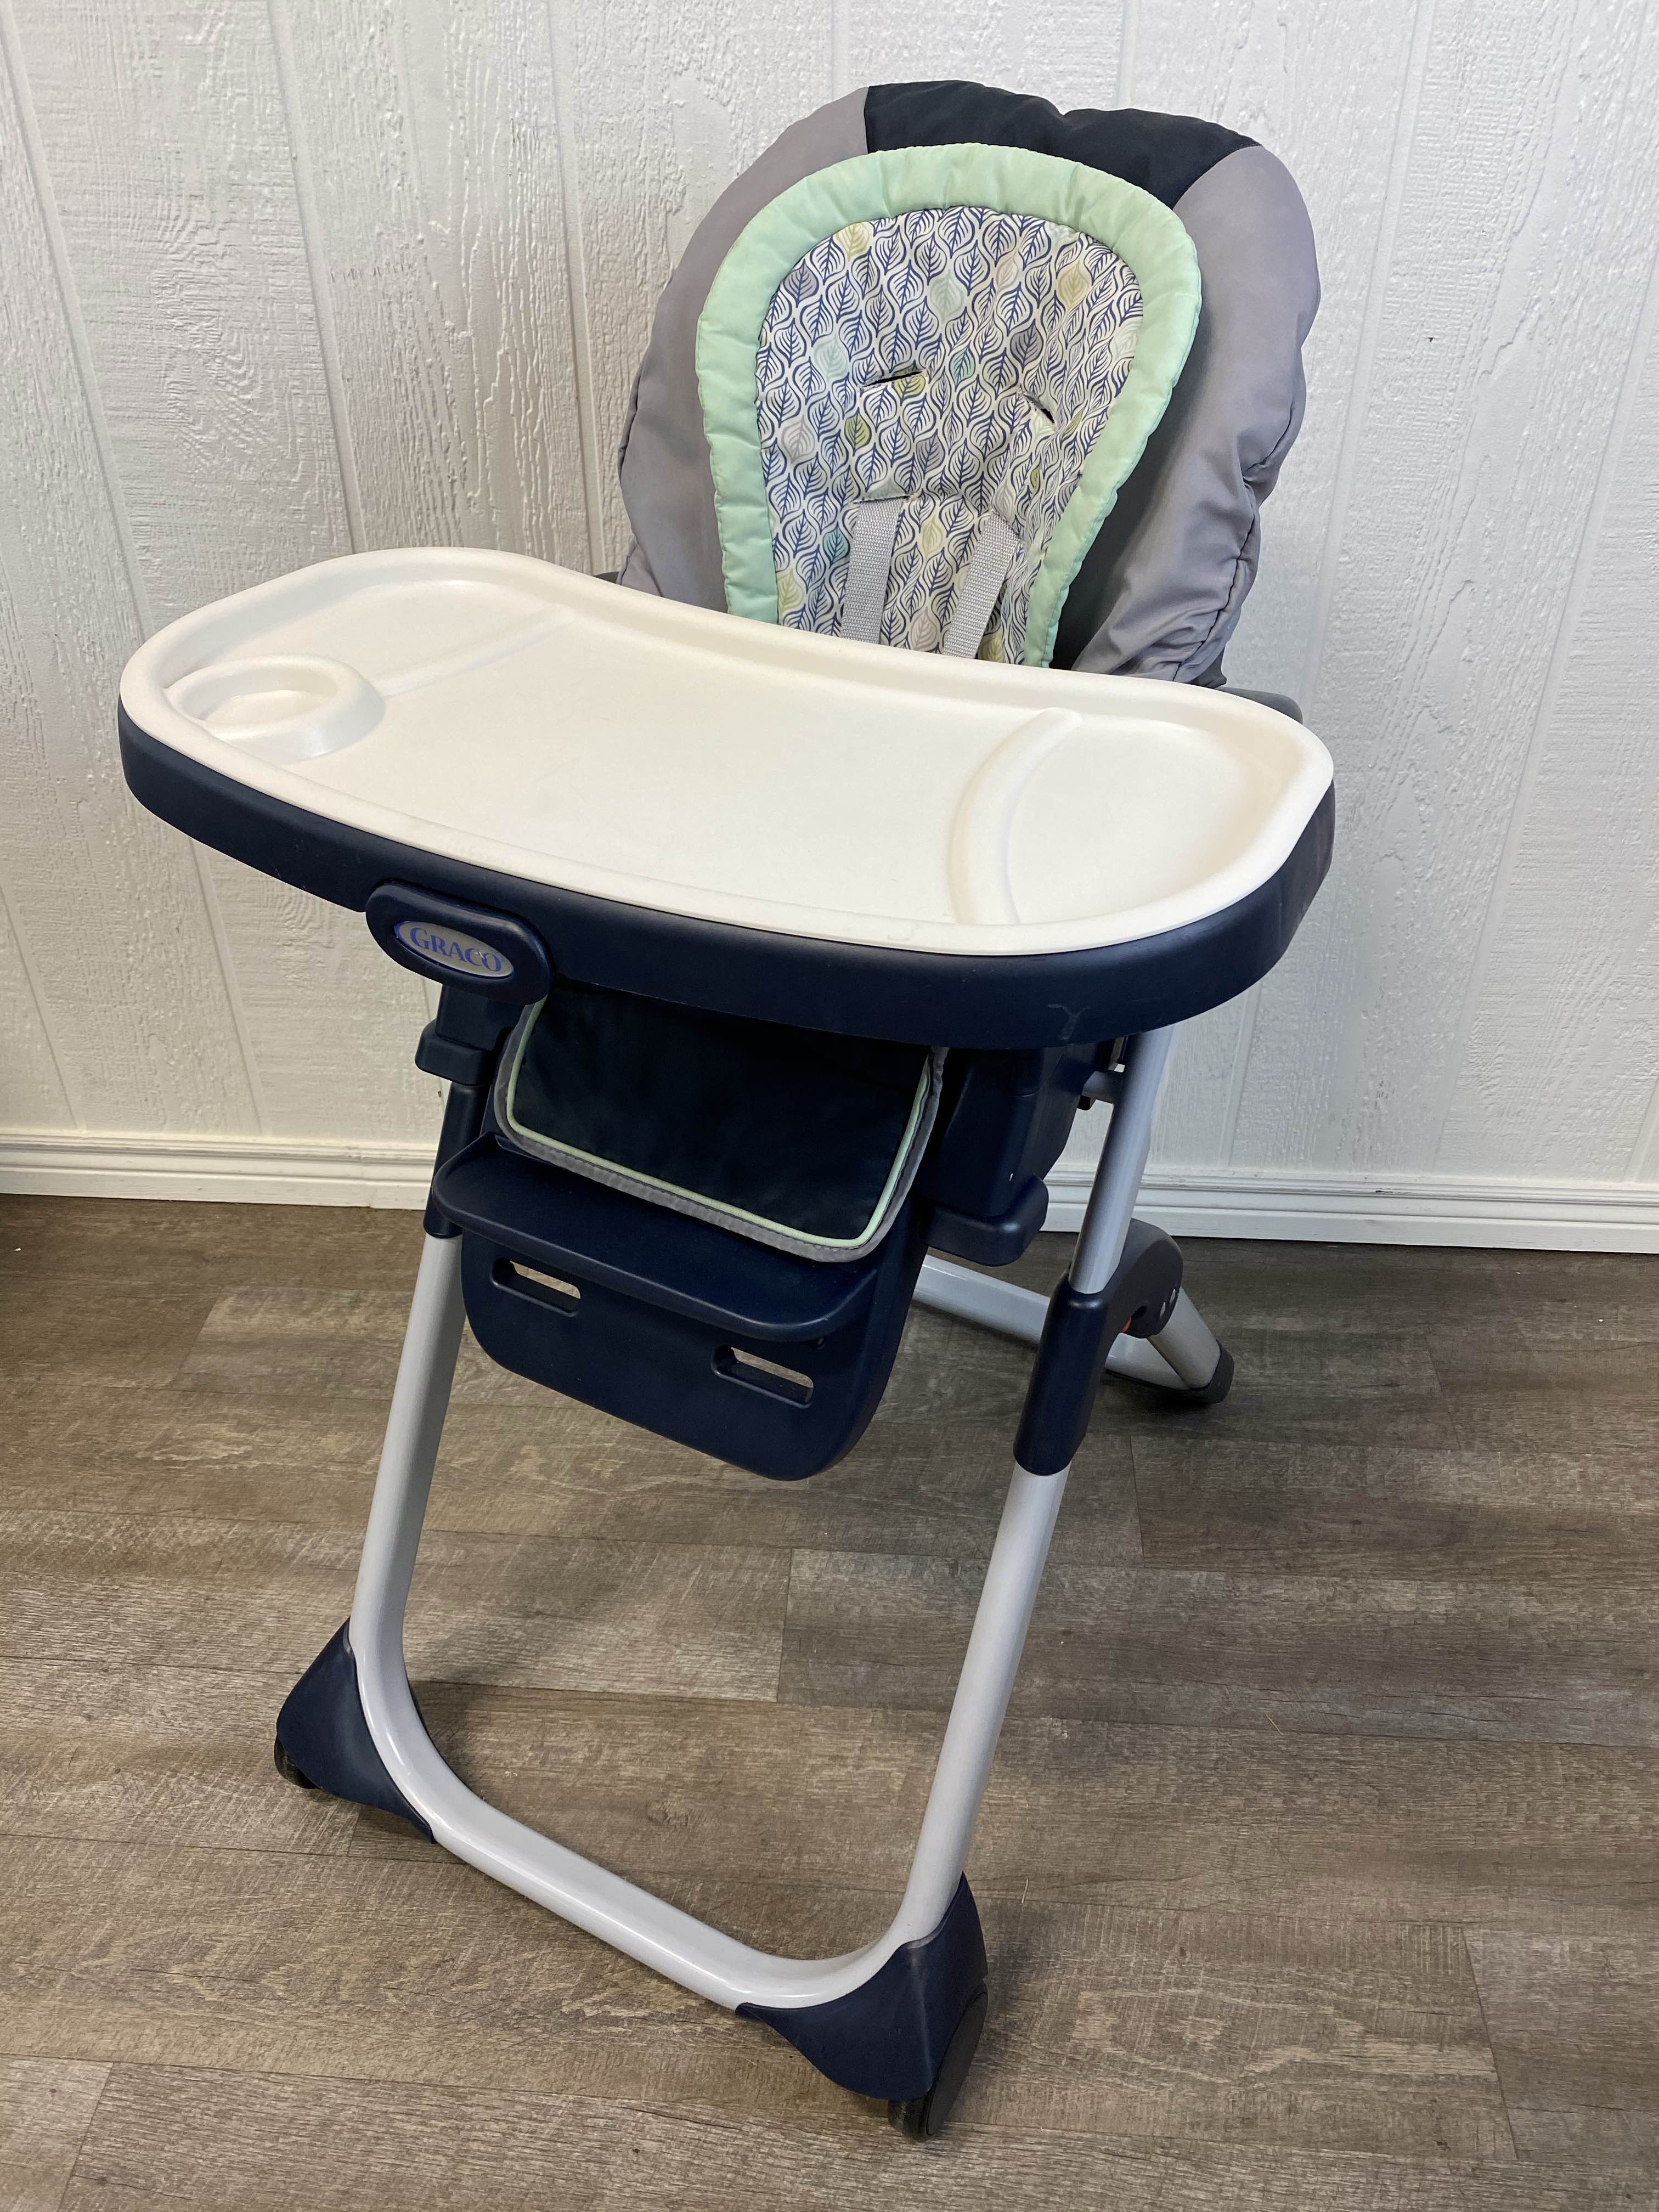 graco duodiner lx high chair